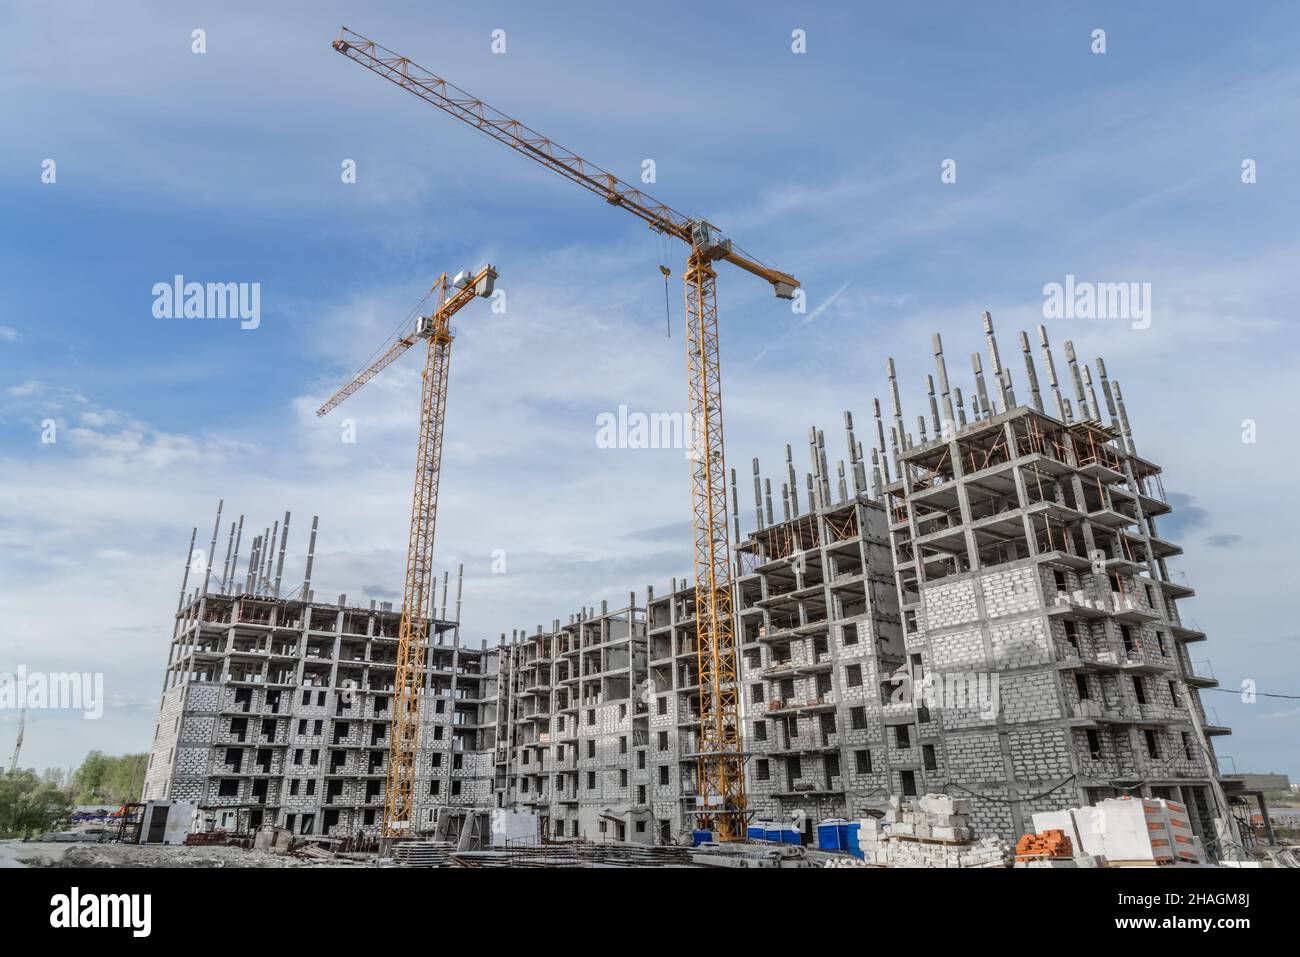 Building crane and building under construction against blue sky Stock Photo